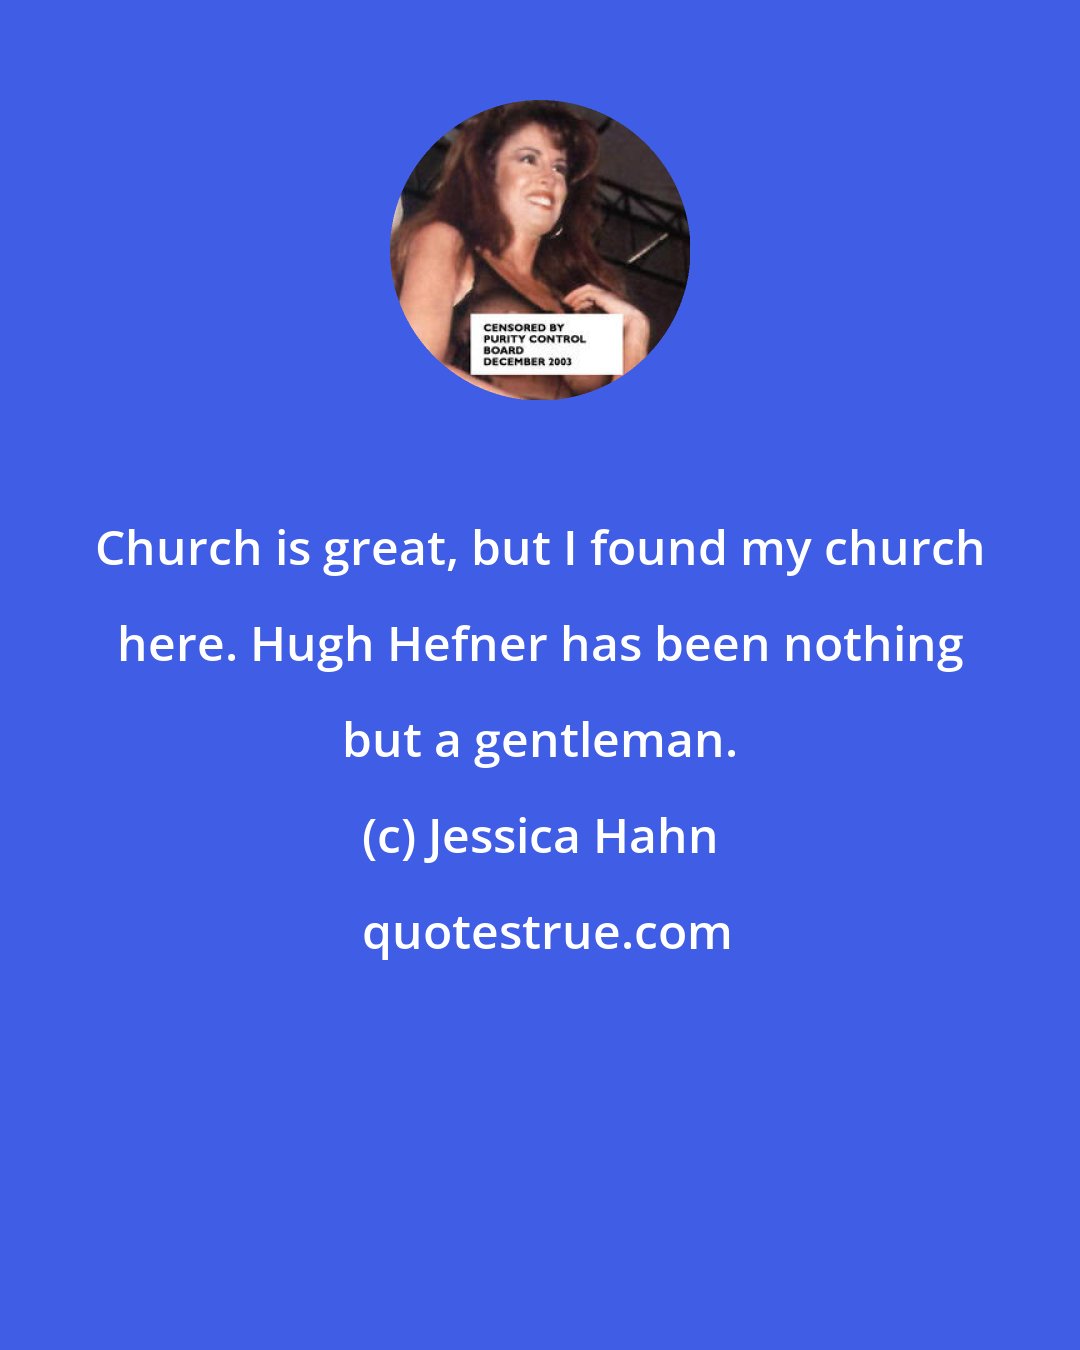 Jessica Hahn: Church is great, but I found my church here. Hugh Hefner has been nothing but a gentleman.